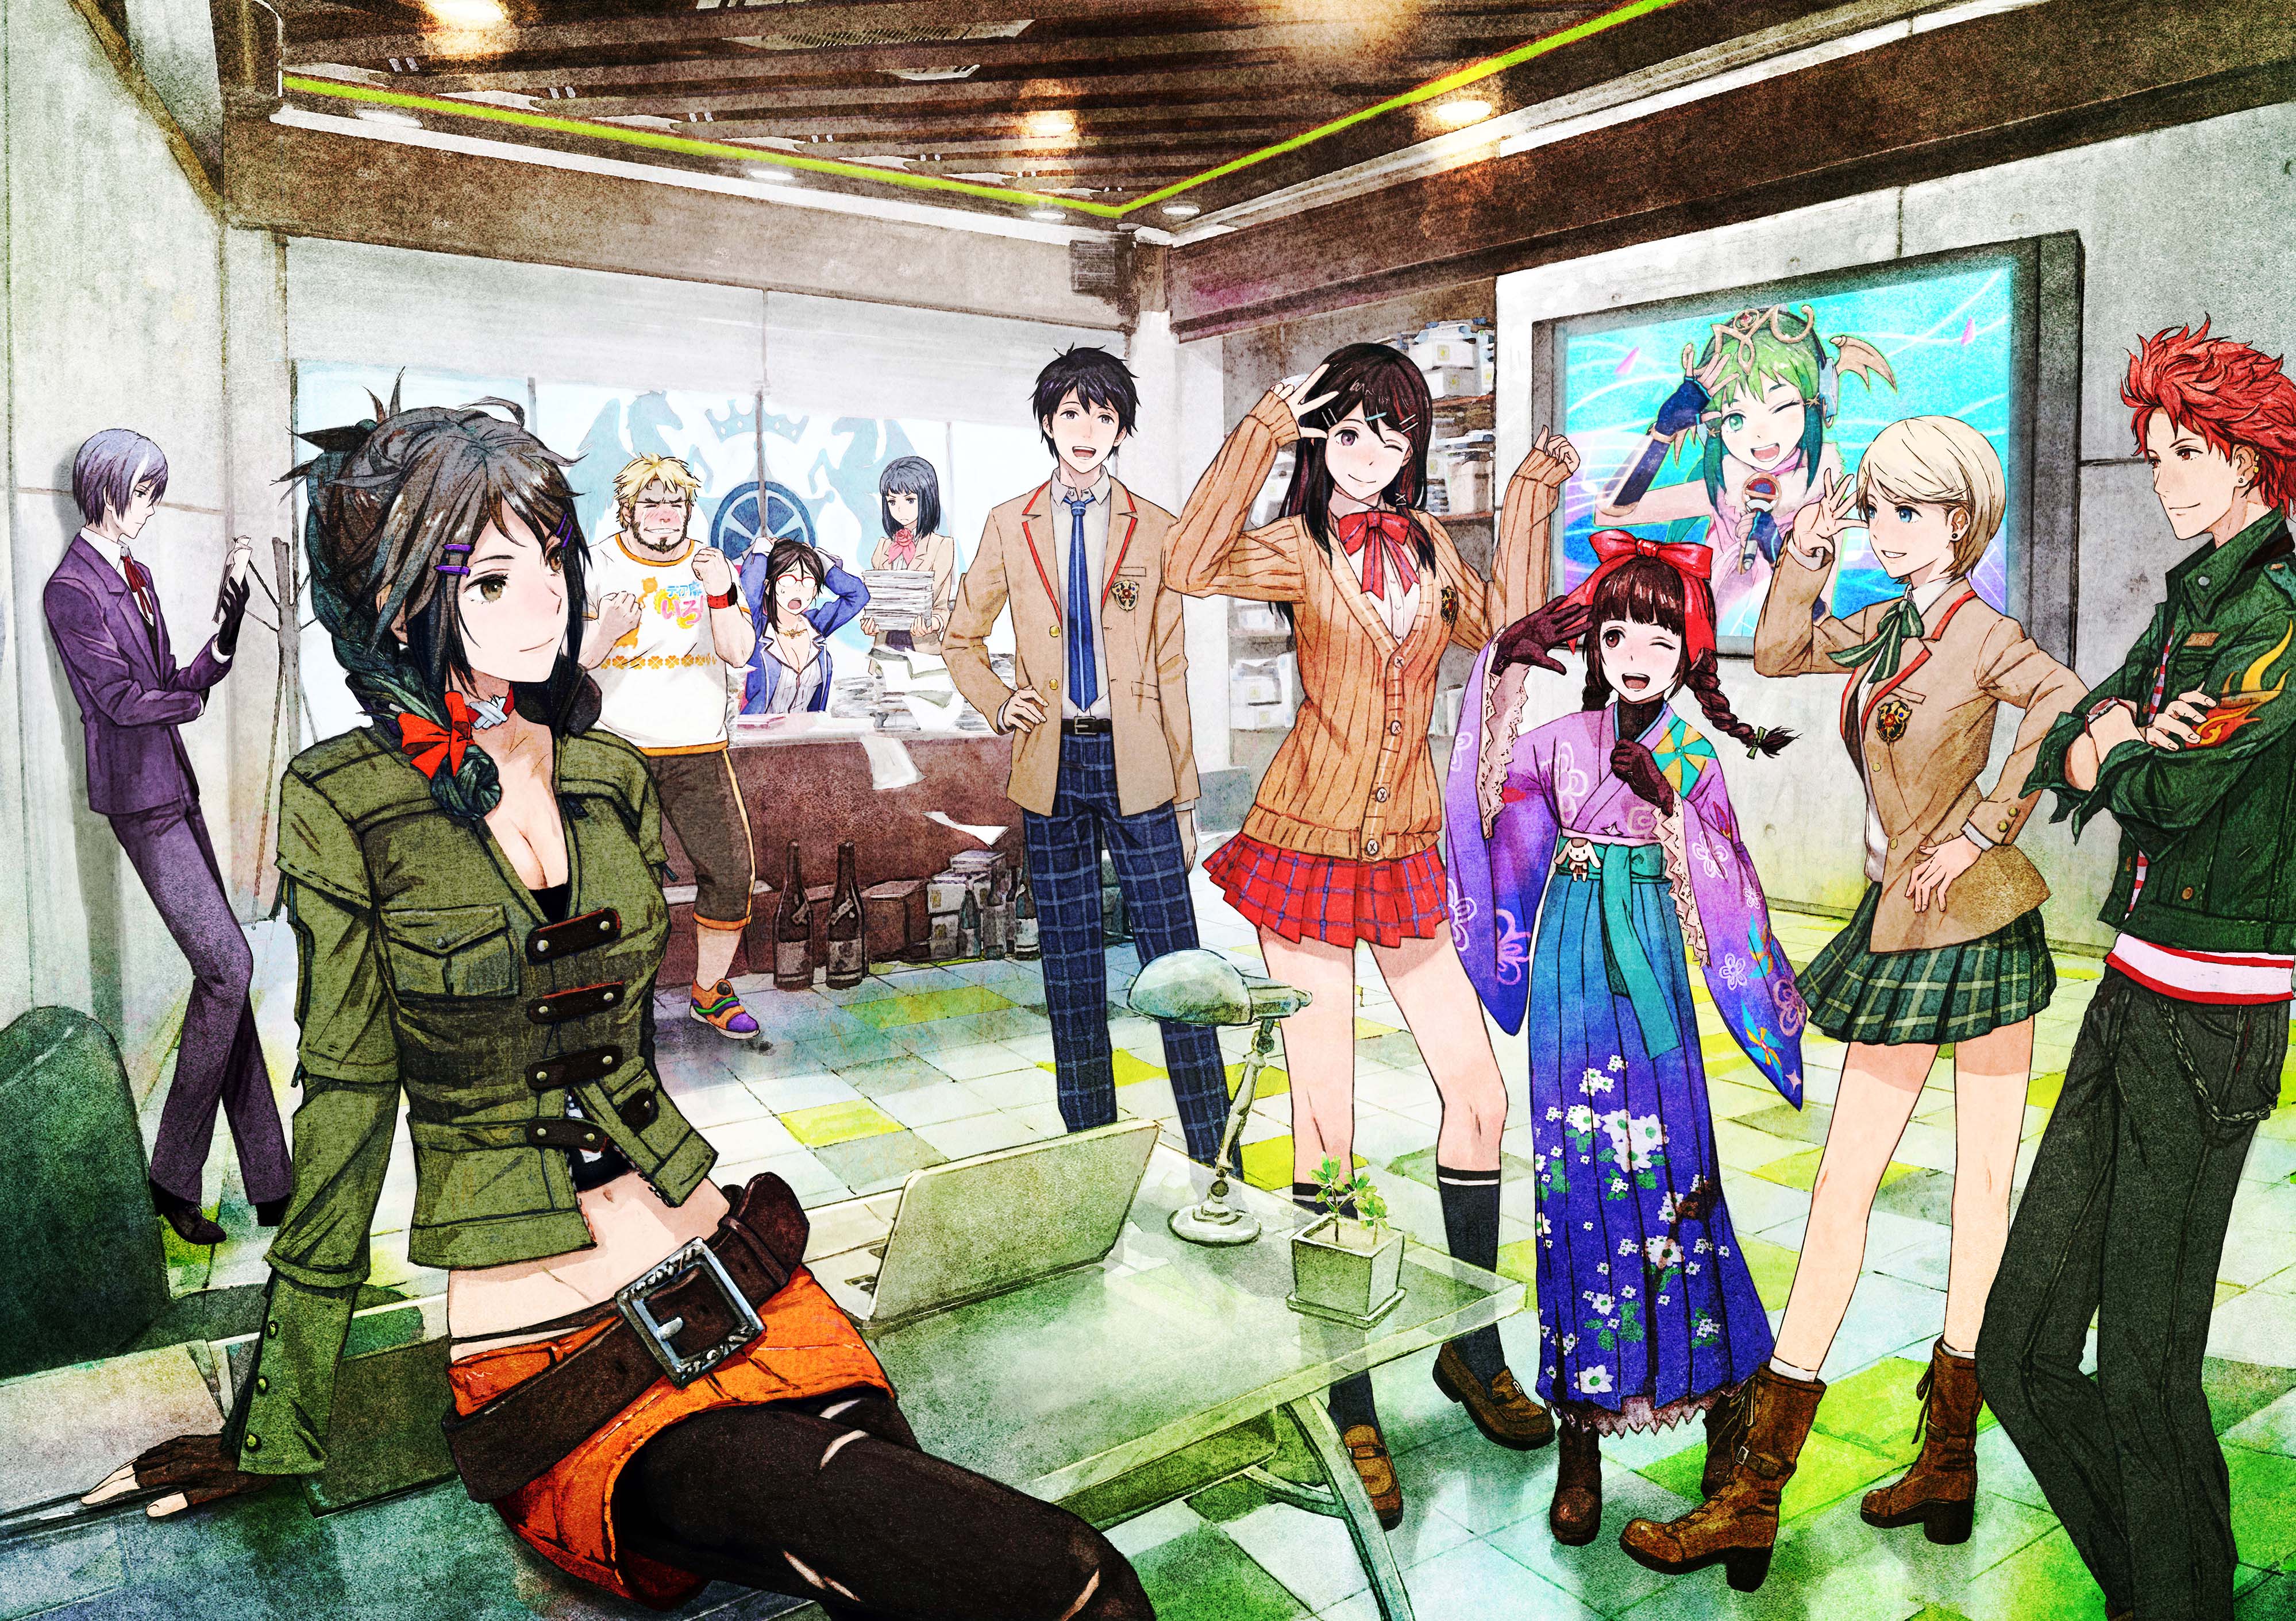 Tokyo Mirage Sessions #FE #19